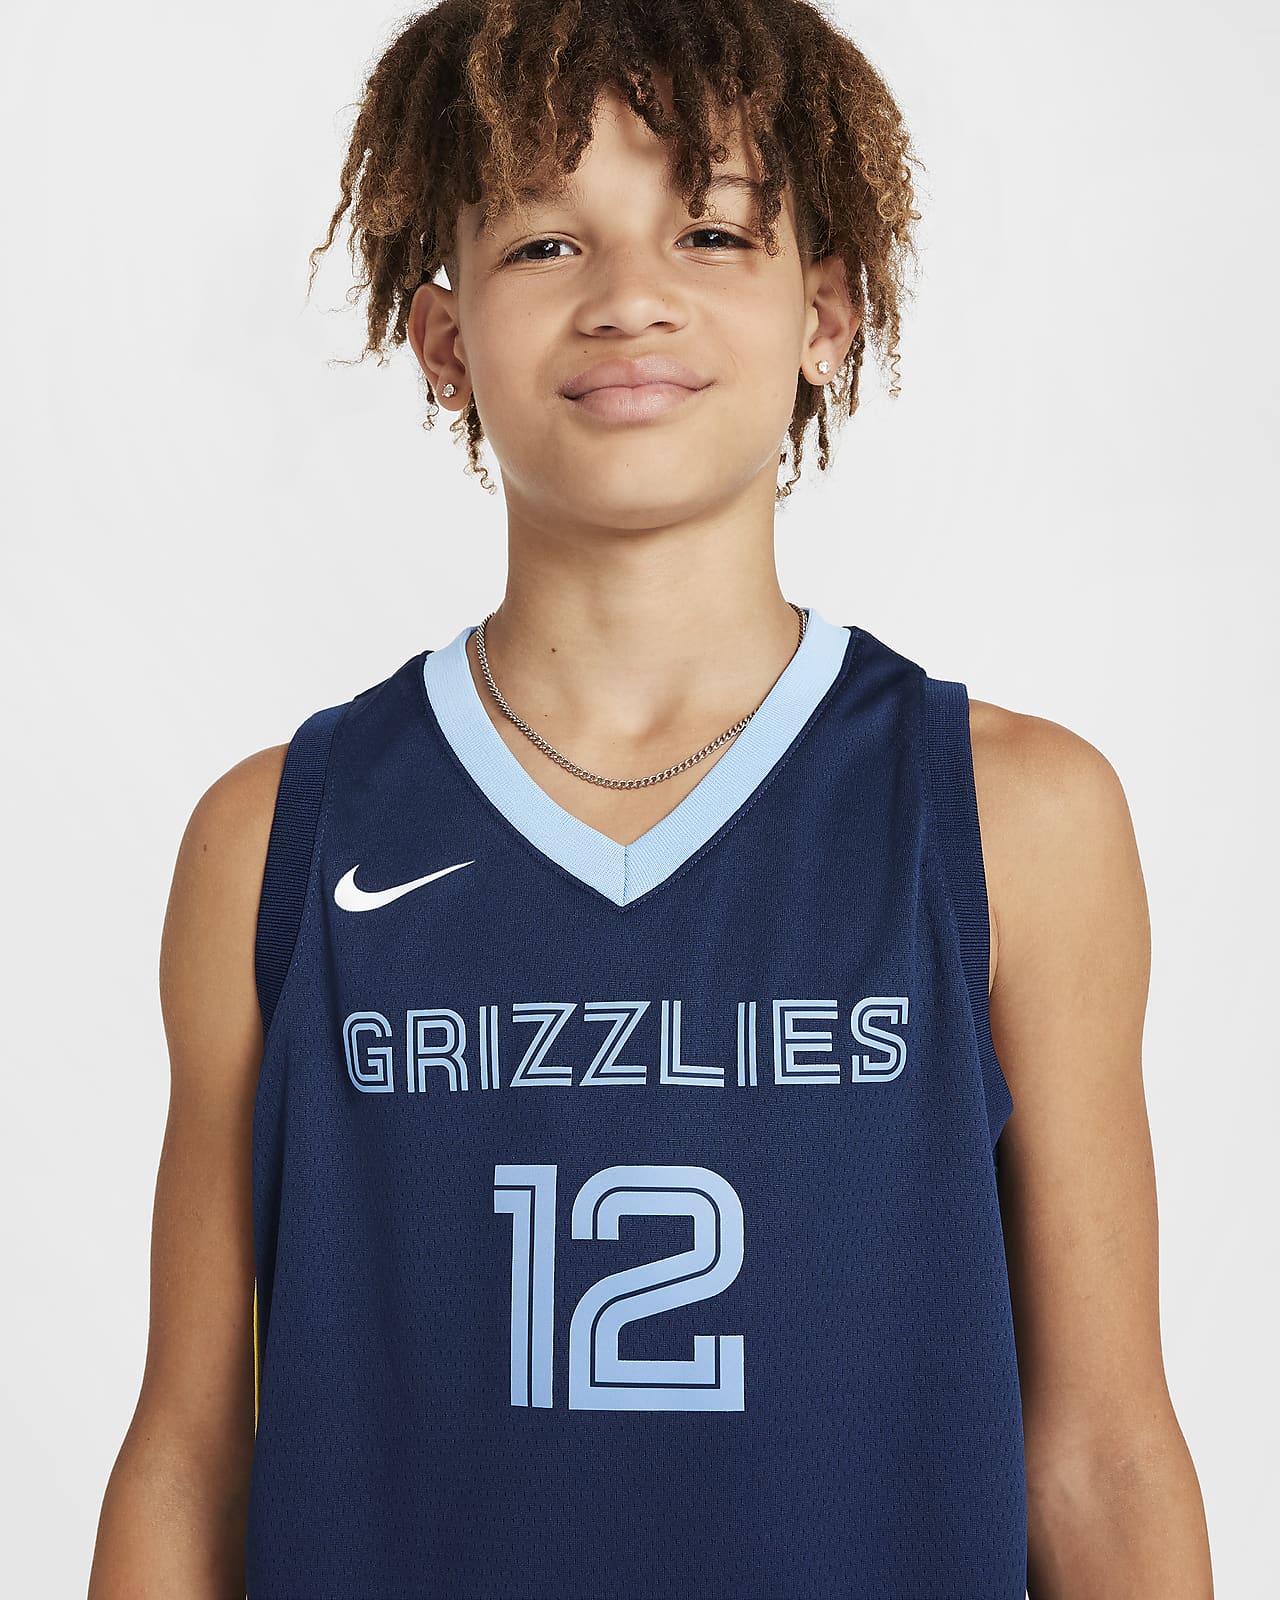 grizzlies jersey youth